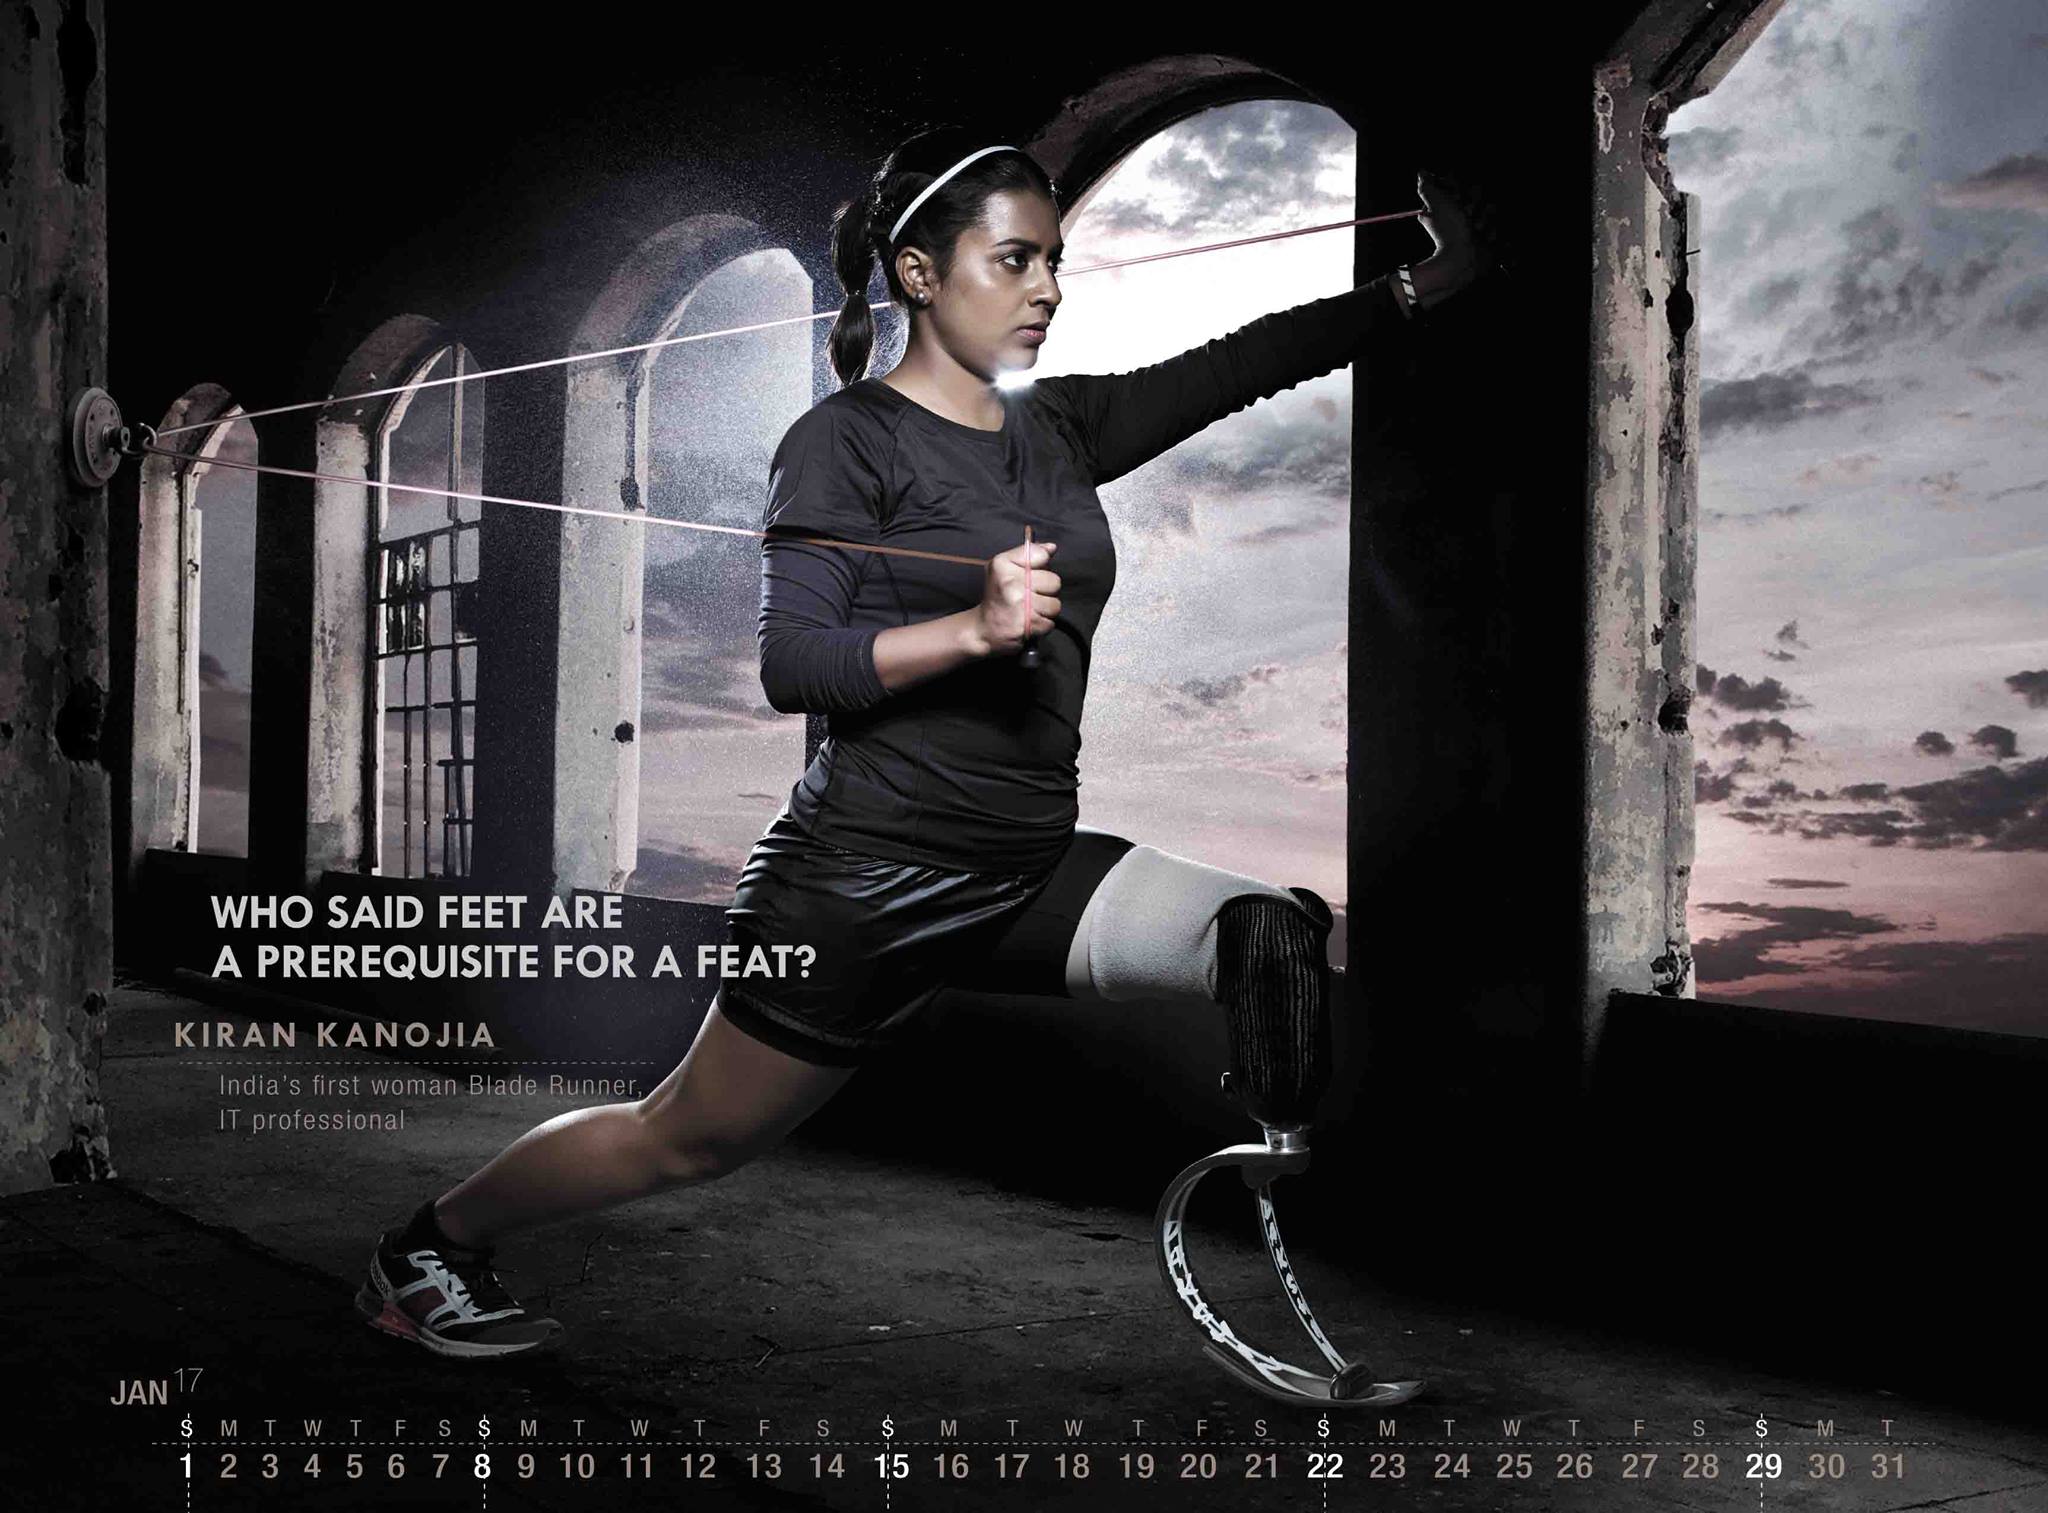 This Republic Day, Meet The Champions Who Are Featured On Indias First Amputee Calendar